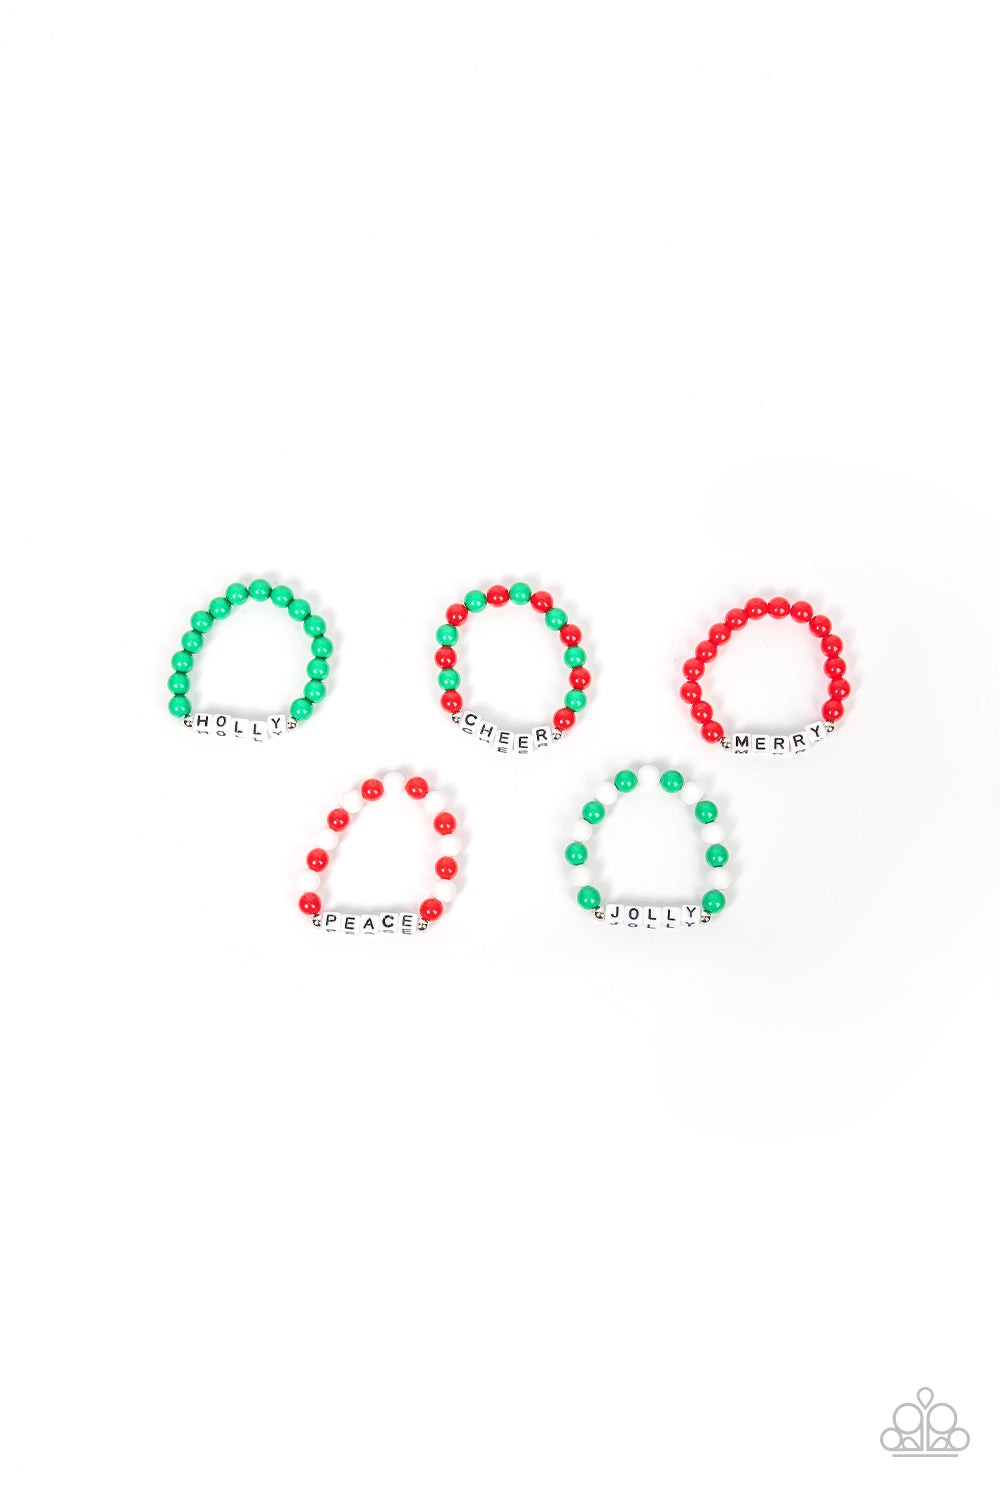 1 pack 5 Holiday Cheer Bracelets